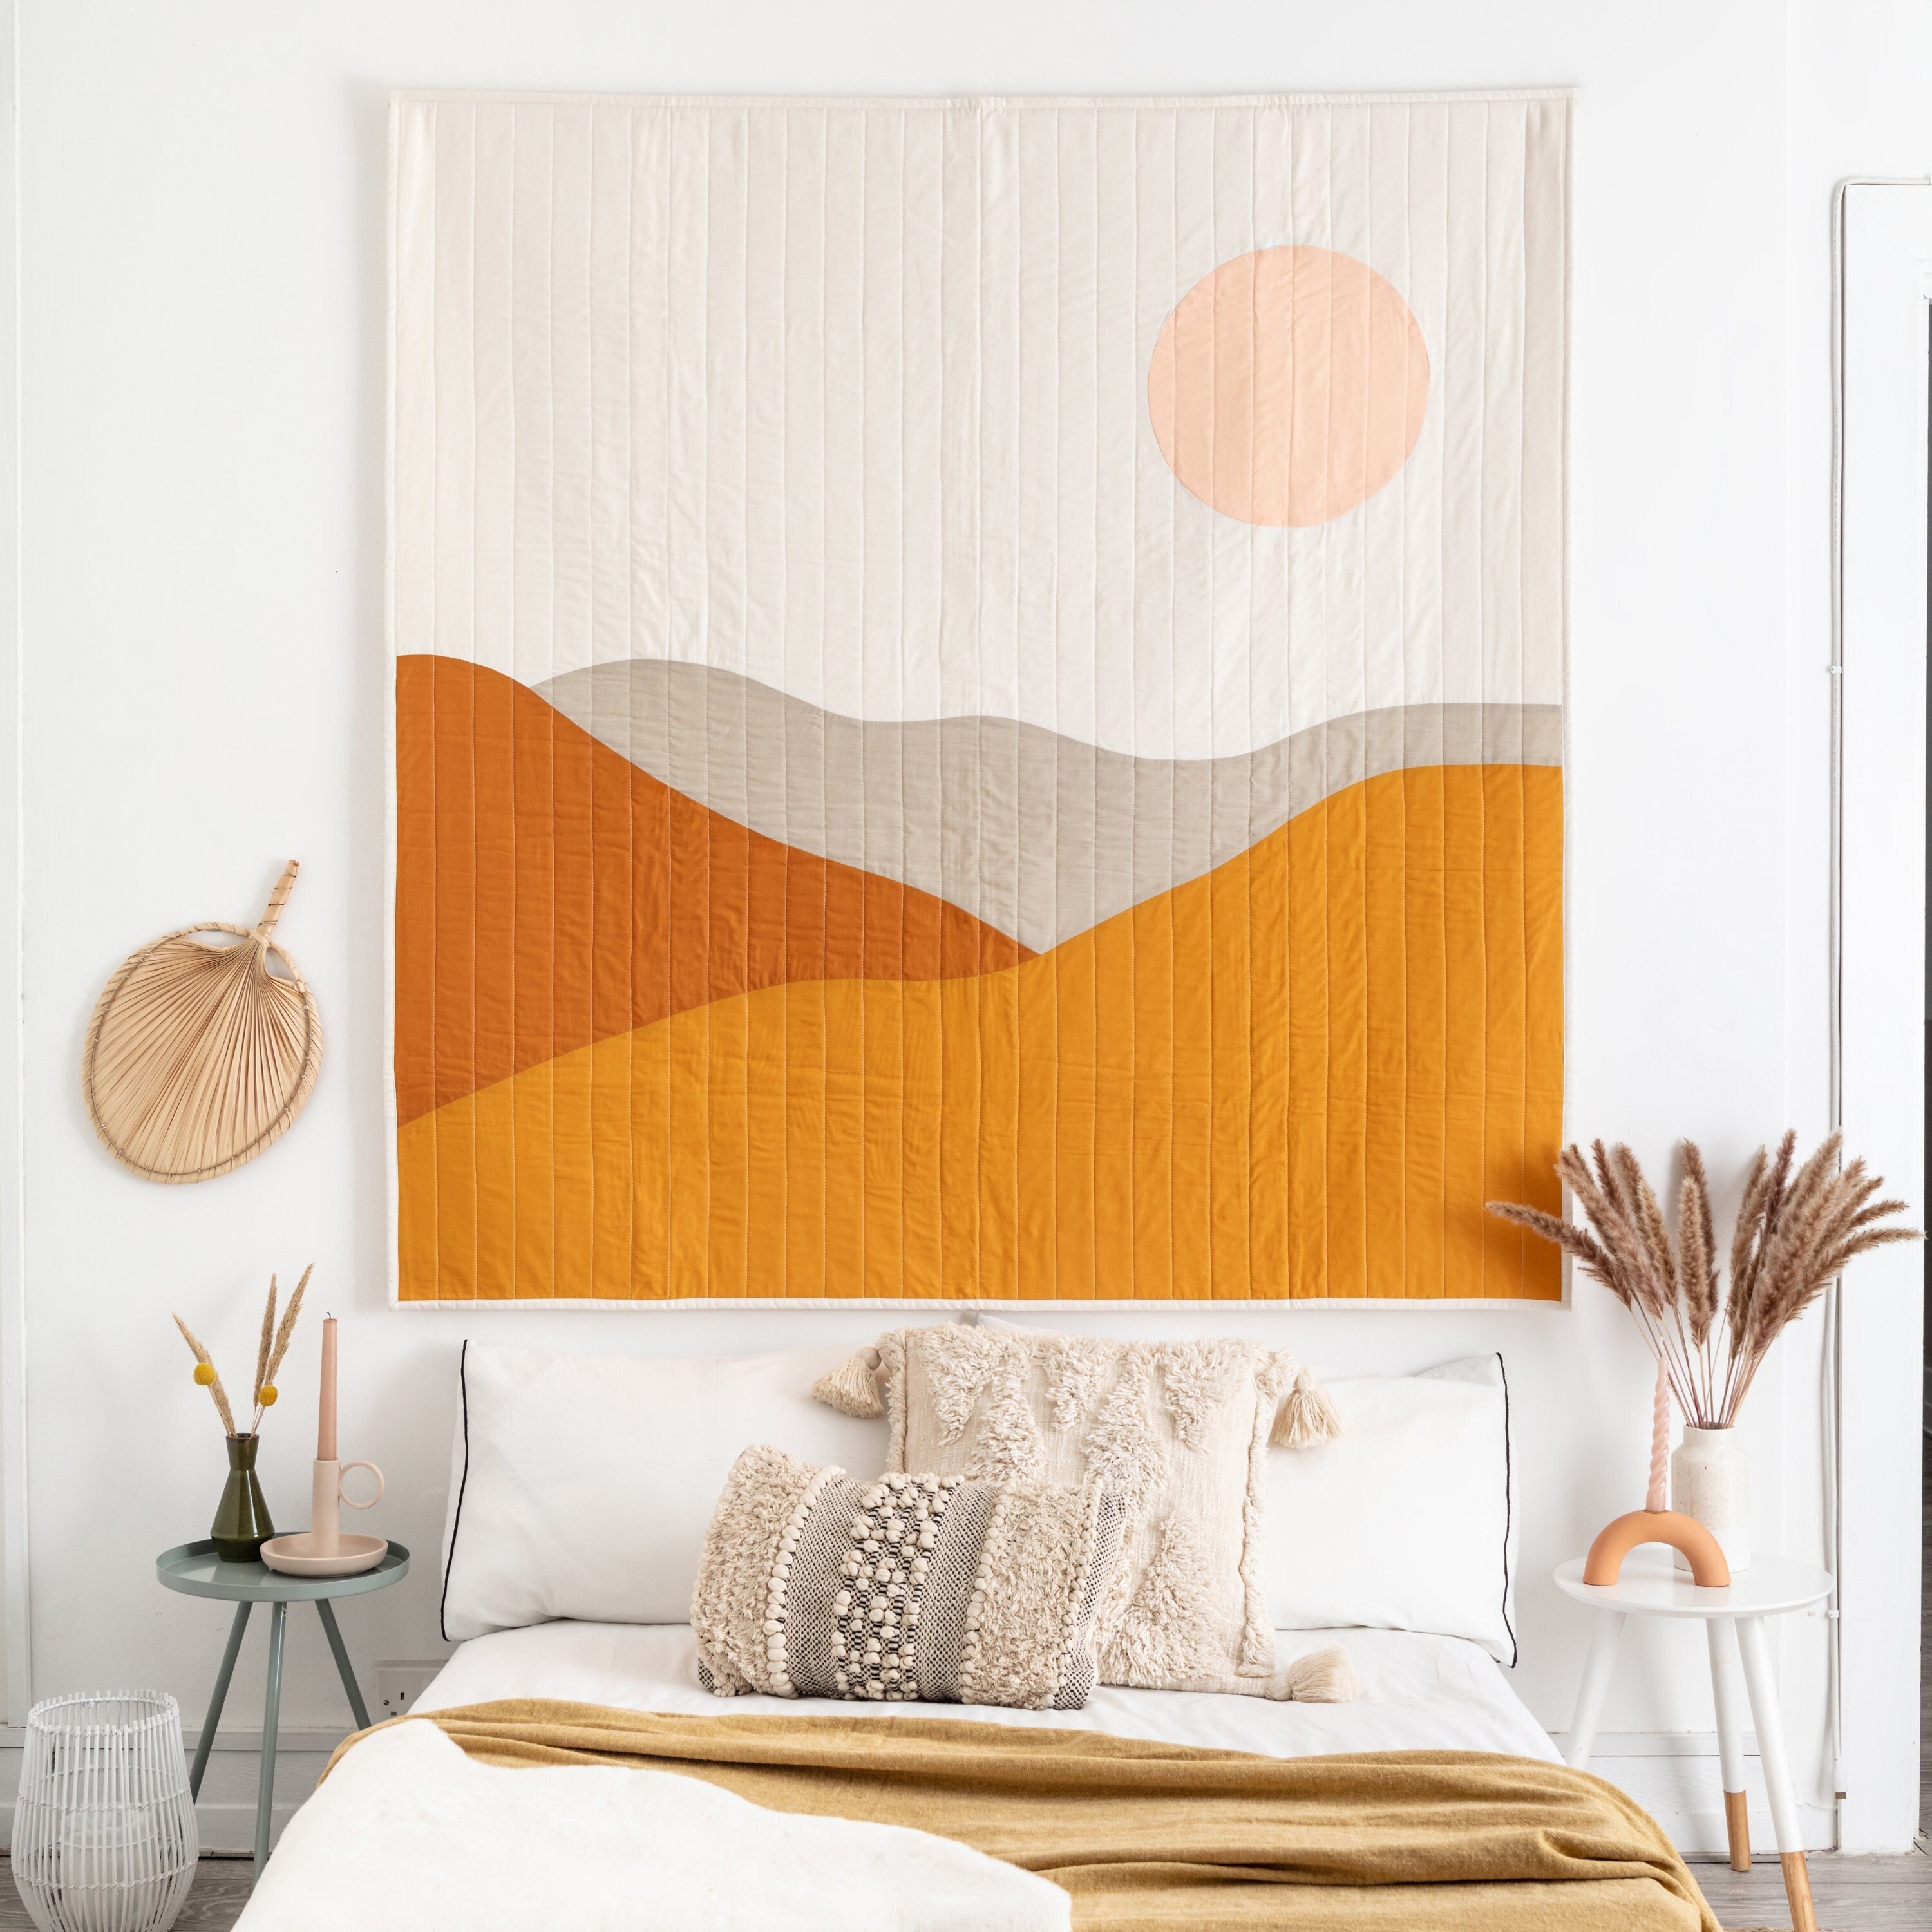 Desert Aesthetic Tapestry Fabric Wall Hanging Over Bed Wall Decor Abstract  Desert Wall Art Large Wall Tapestry Quilt Wall Hanging 